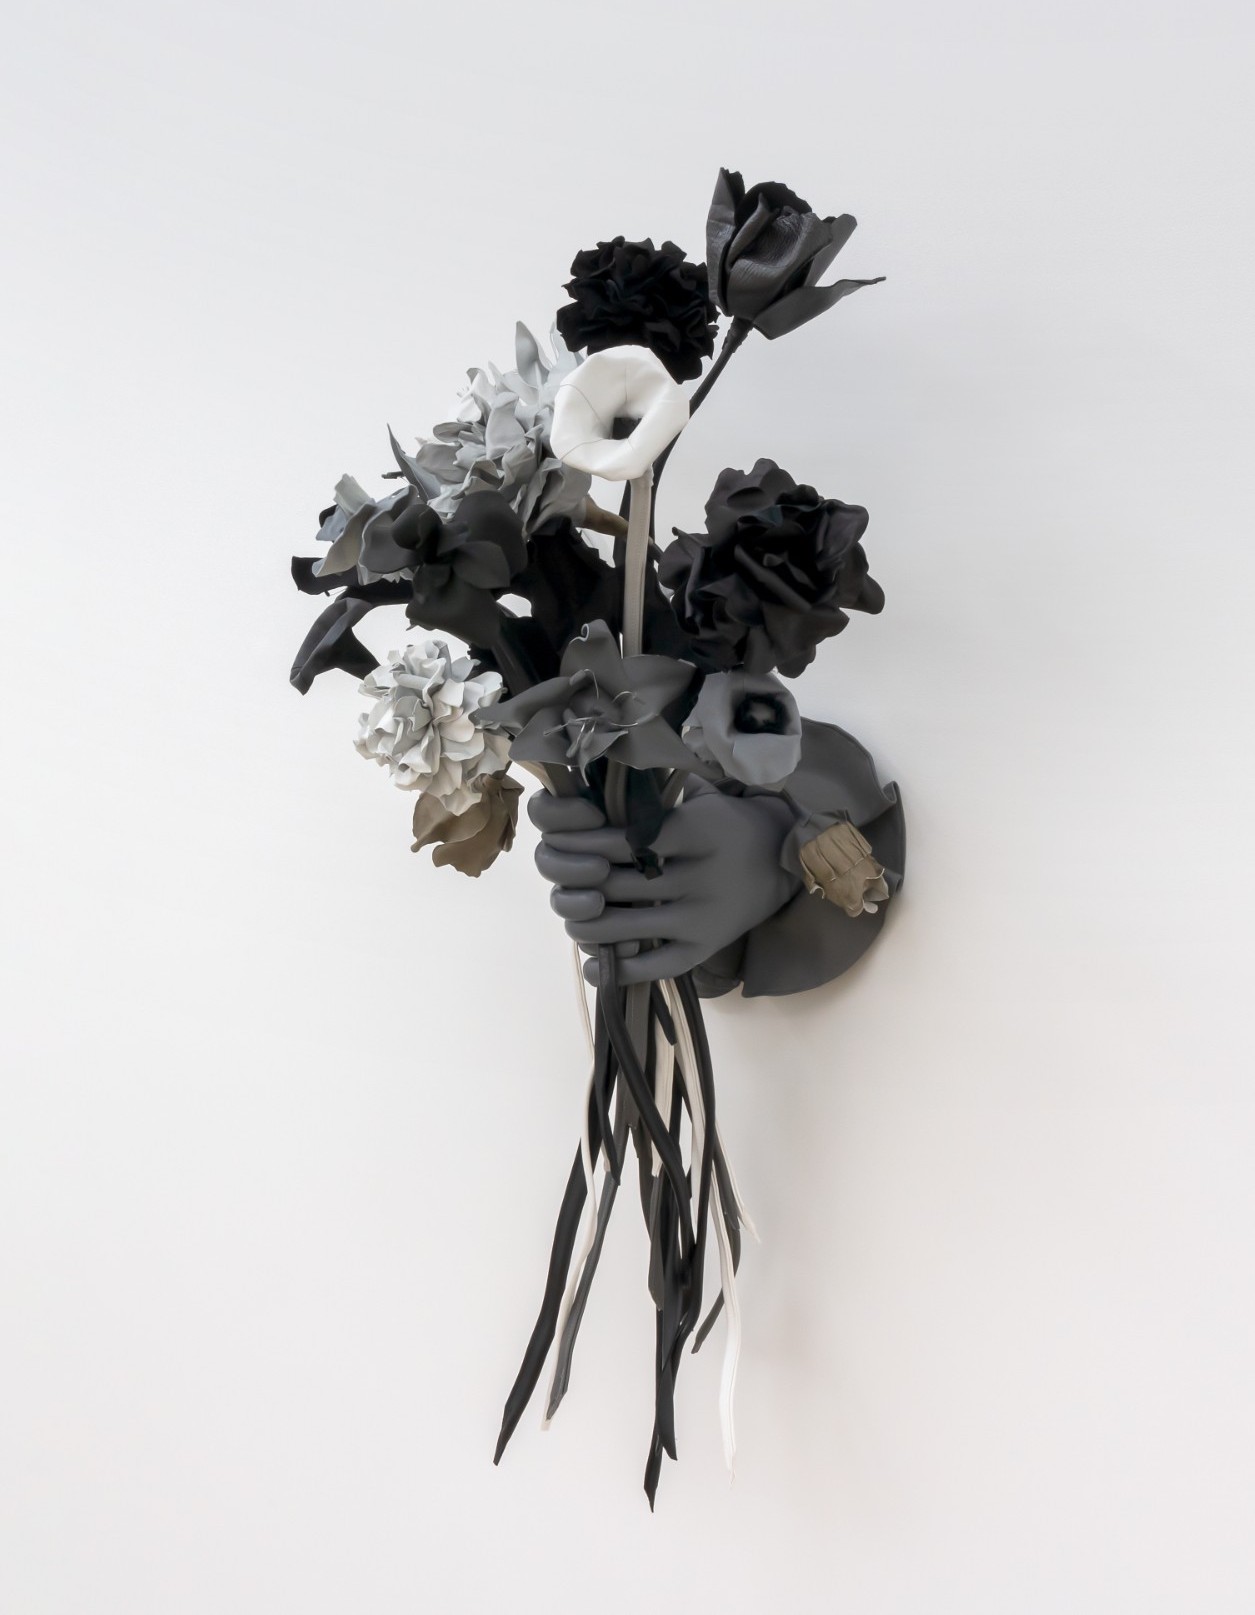 rose-nestler-sottobosco-bouquet-after-rachel-ruysch-2021-leather-wire-wood-polyester-filling-101-x-58-x-43-cm-courtesy-of-the-artist-and-public-gallery1